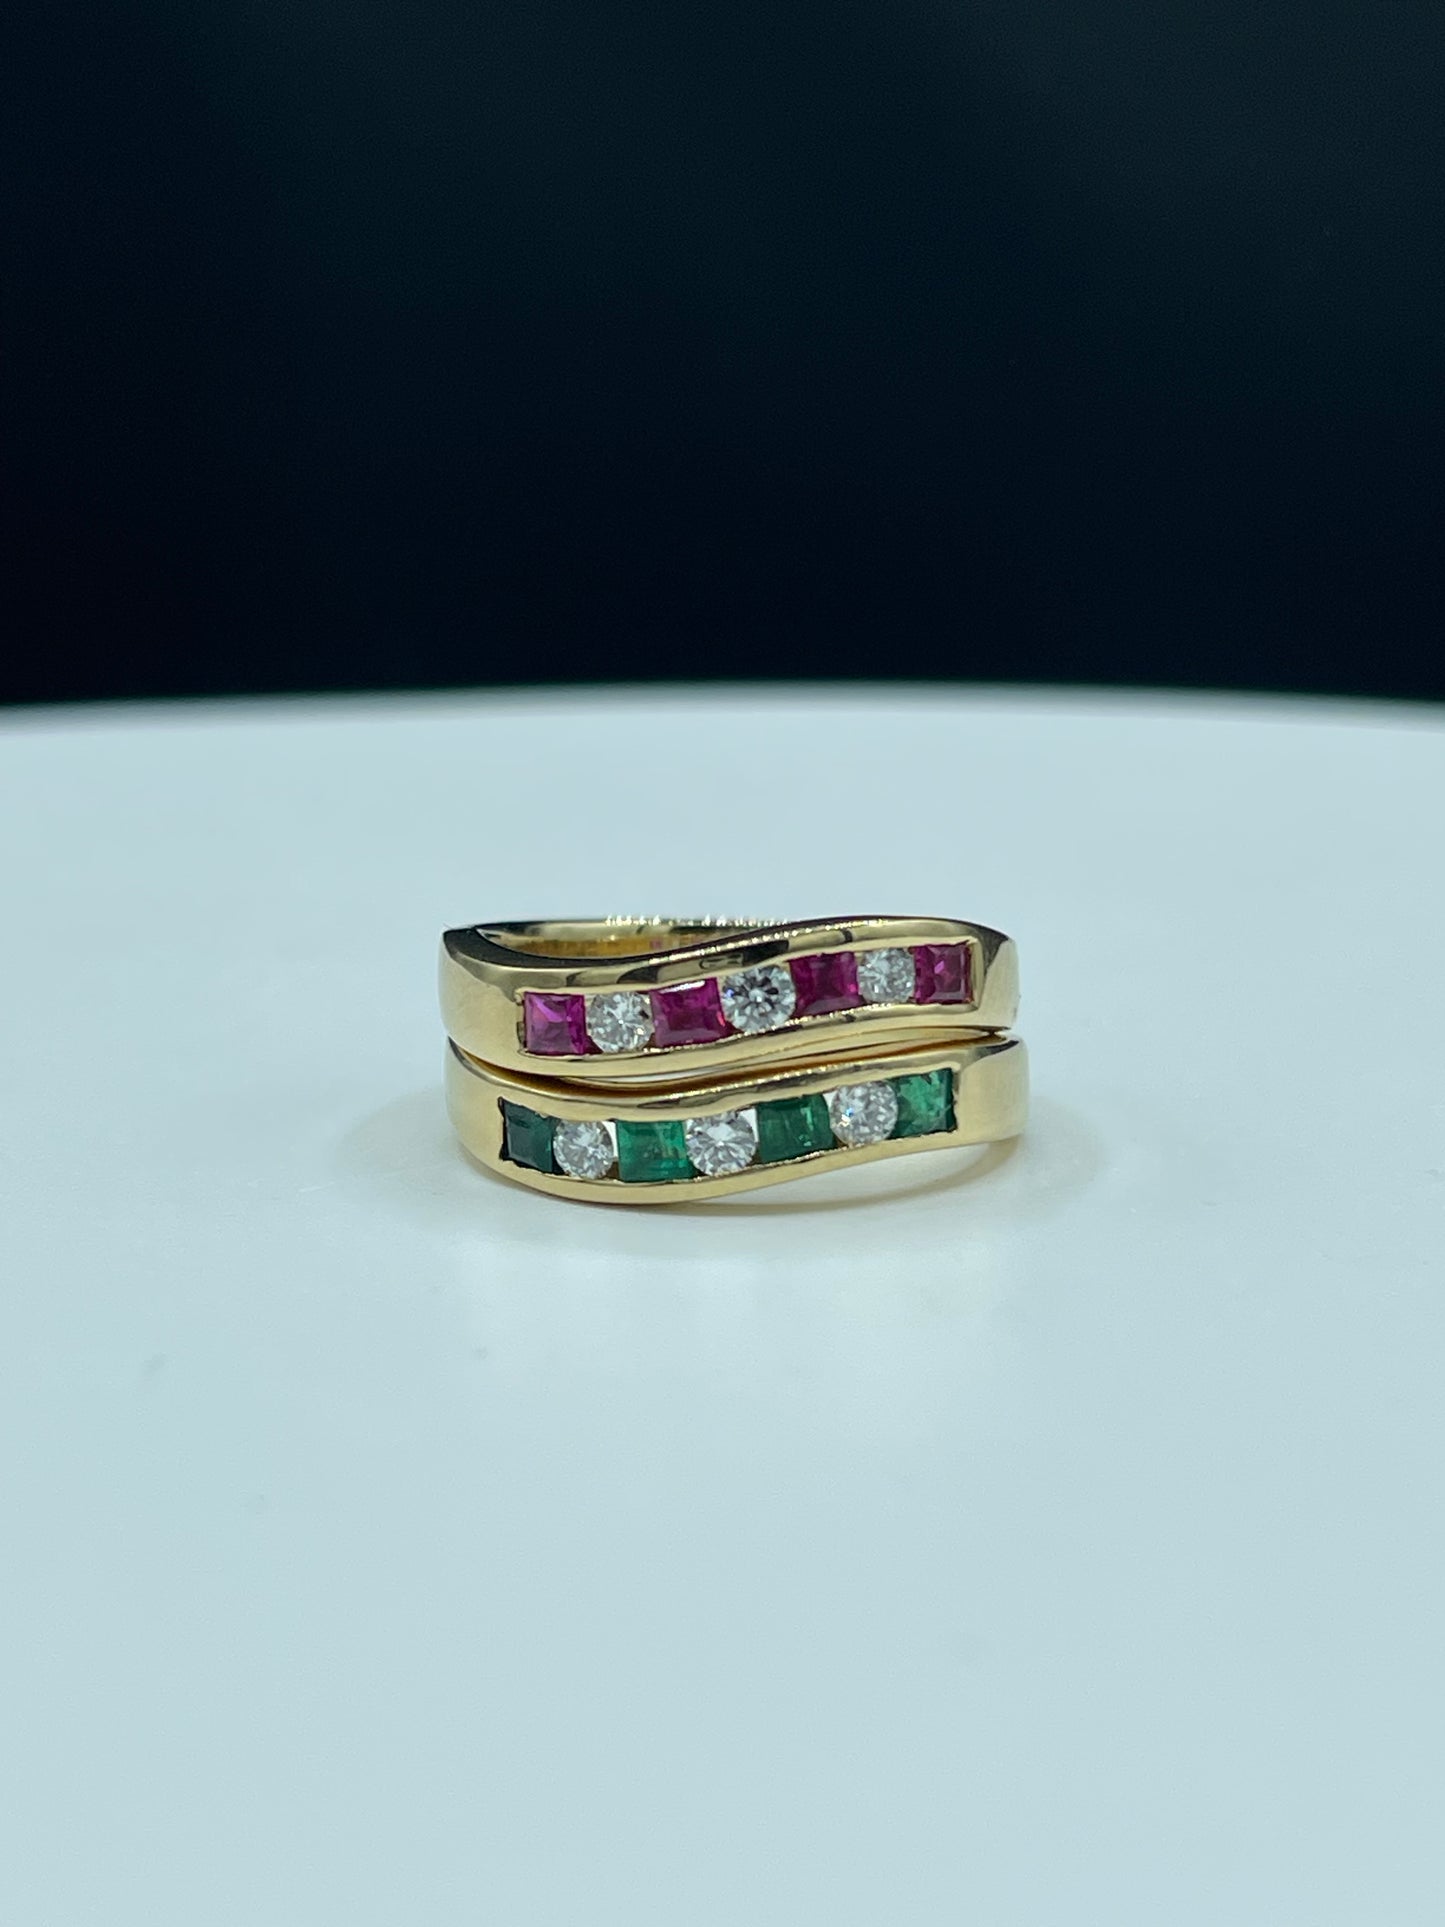 Designer Ruby Emerald Diamond 18k Yellow Gold Stackable Rings (Size 7)